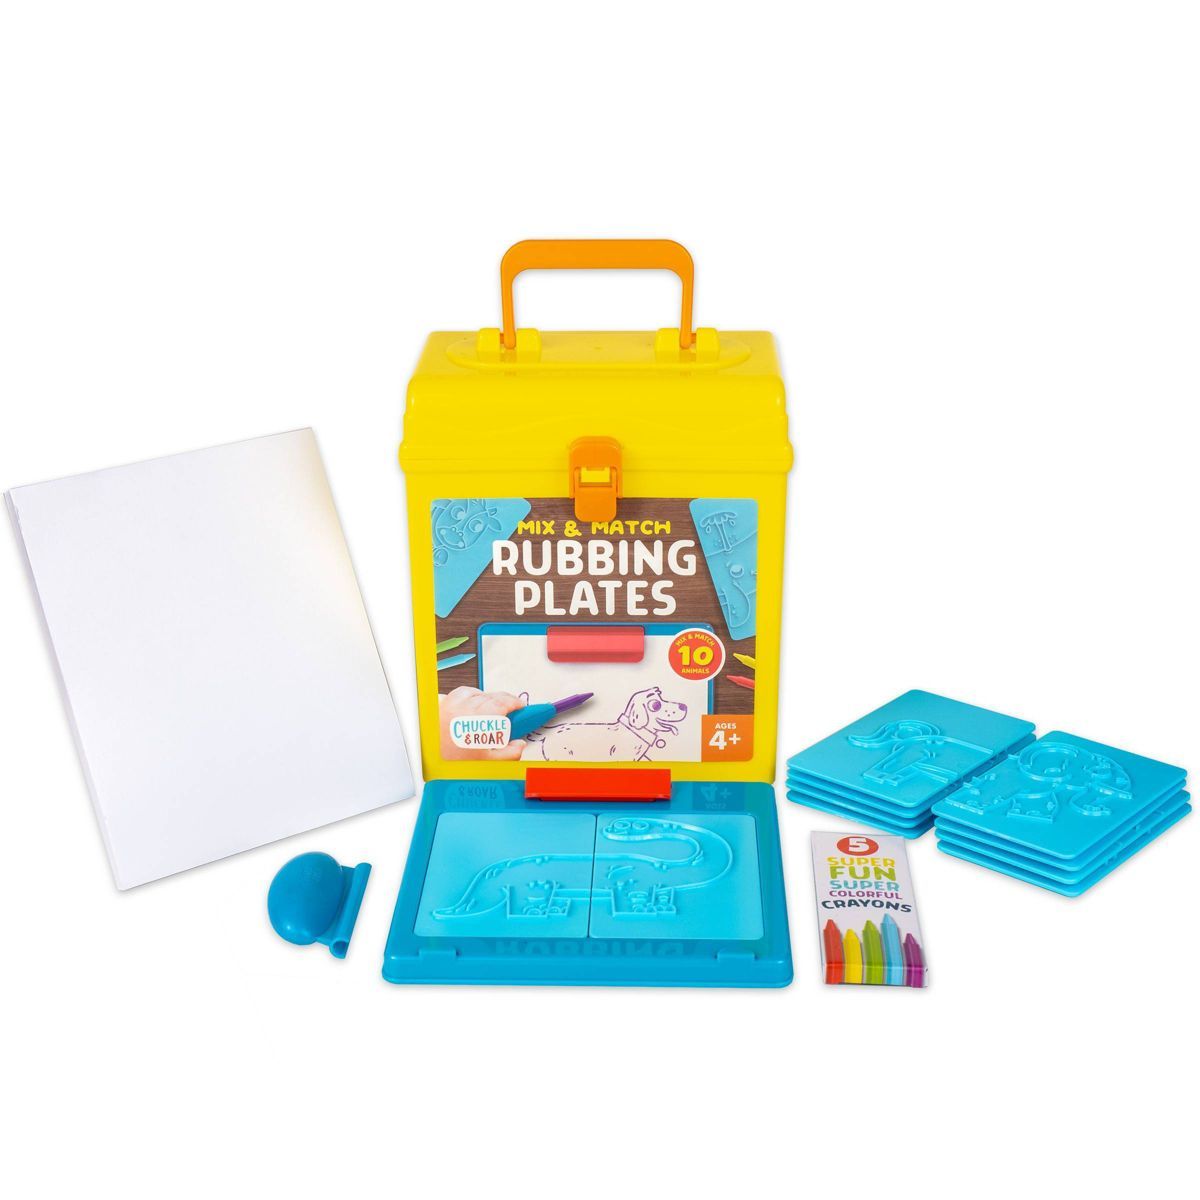 Mix & Match Rubbing Plates with 5 Crayons - Chuckle & Roar | Target